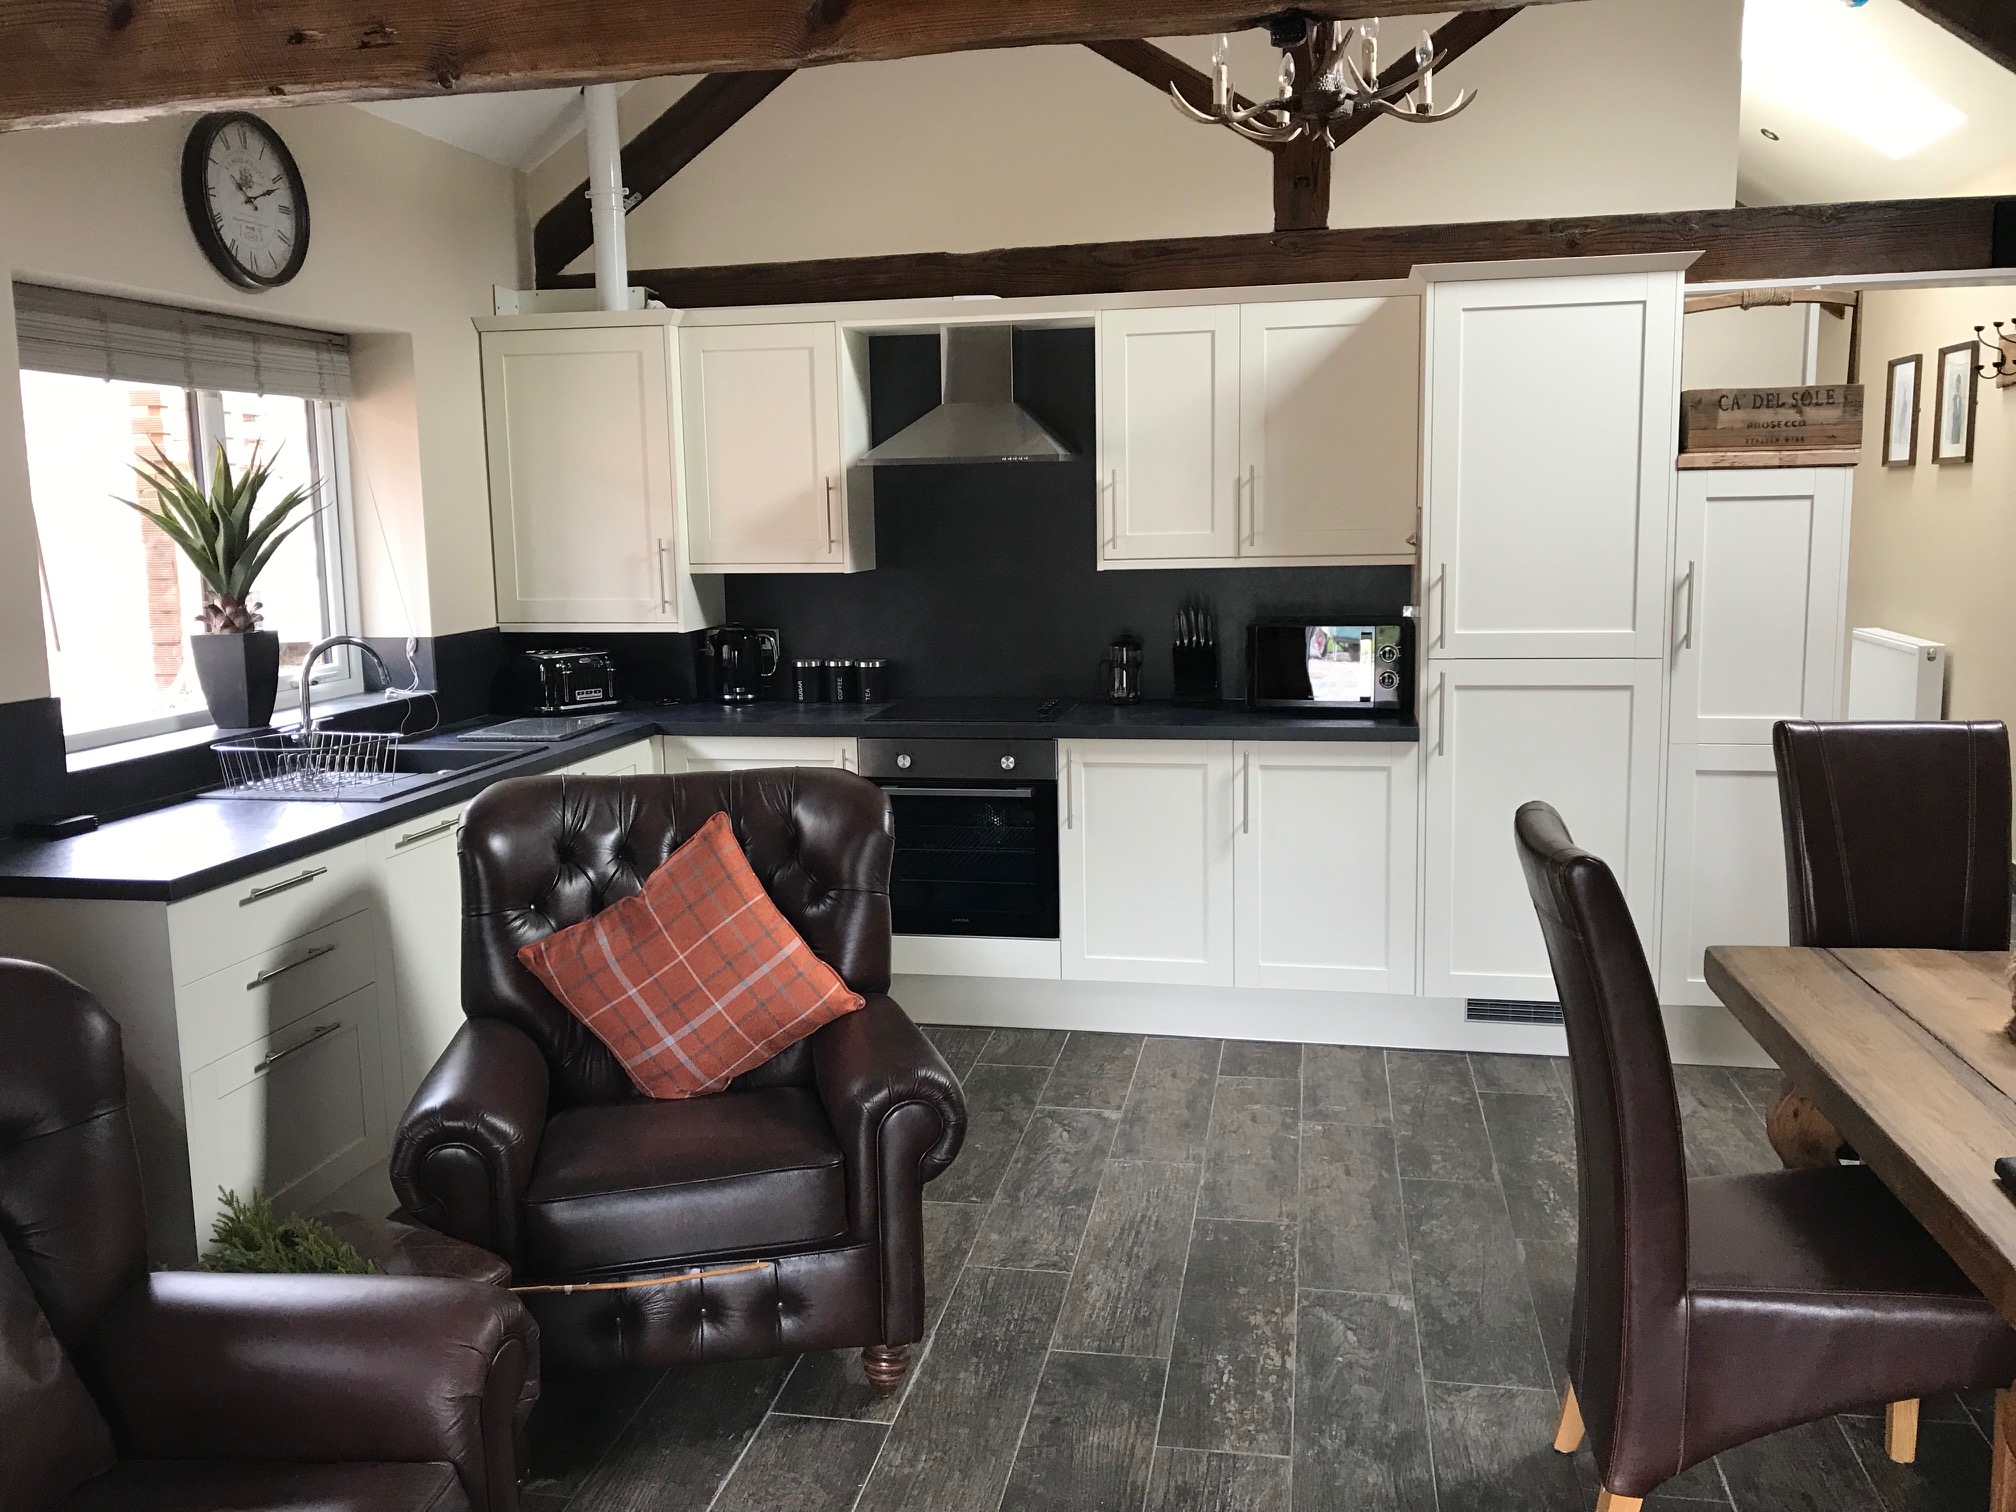 The Gamekeepers Cottage Kitchen